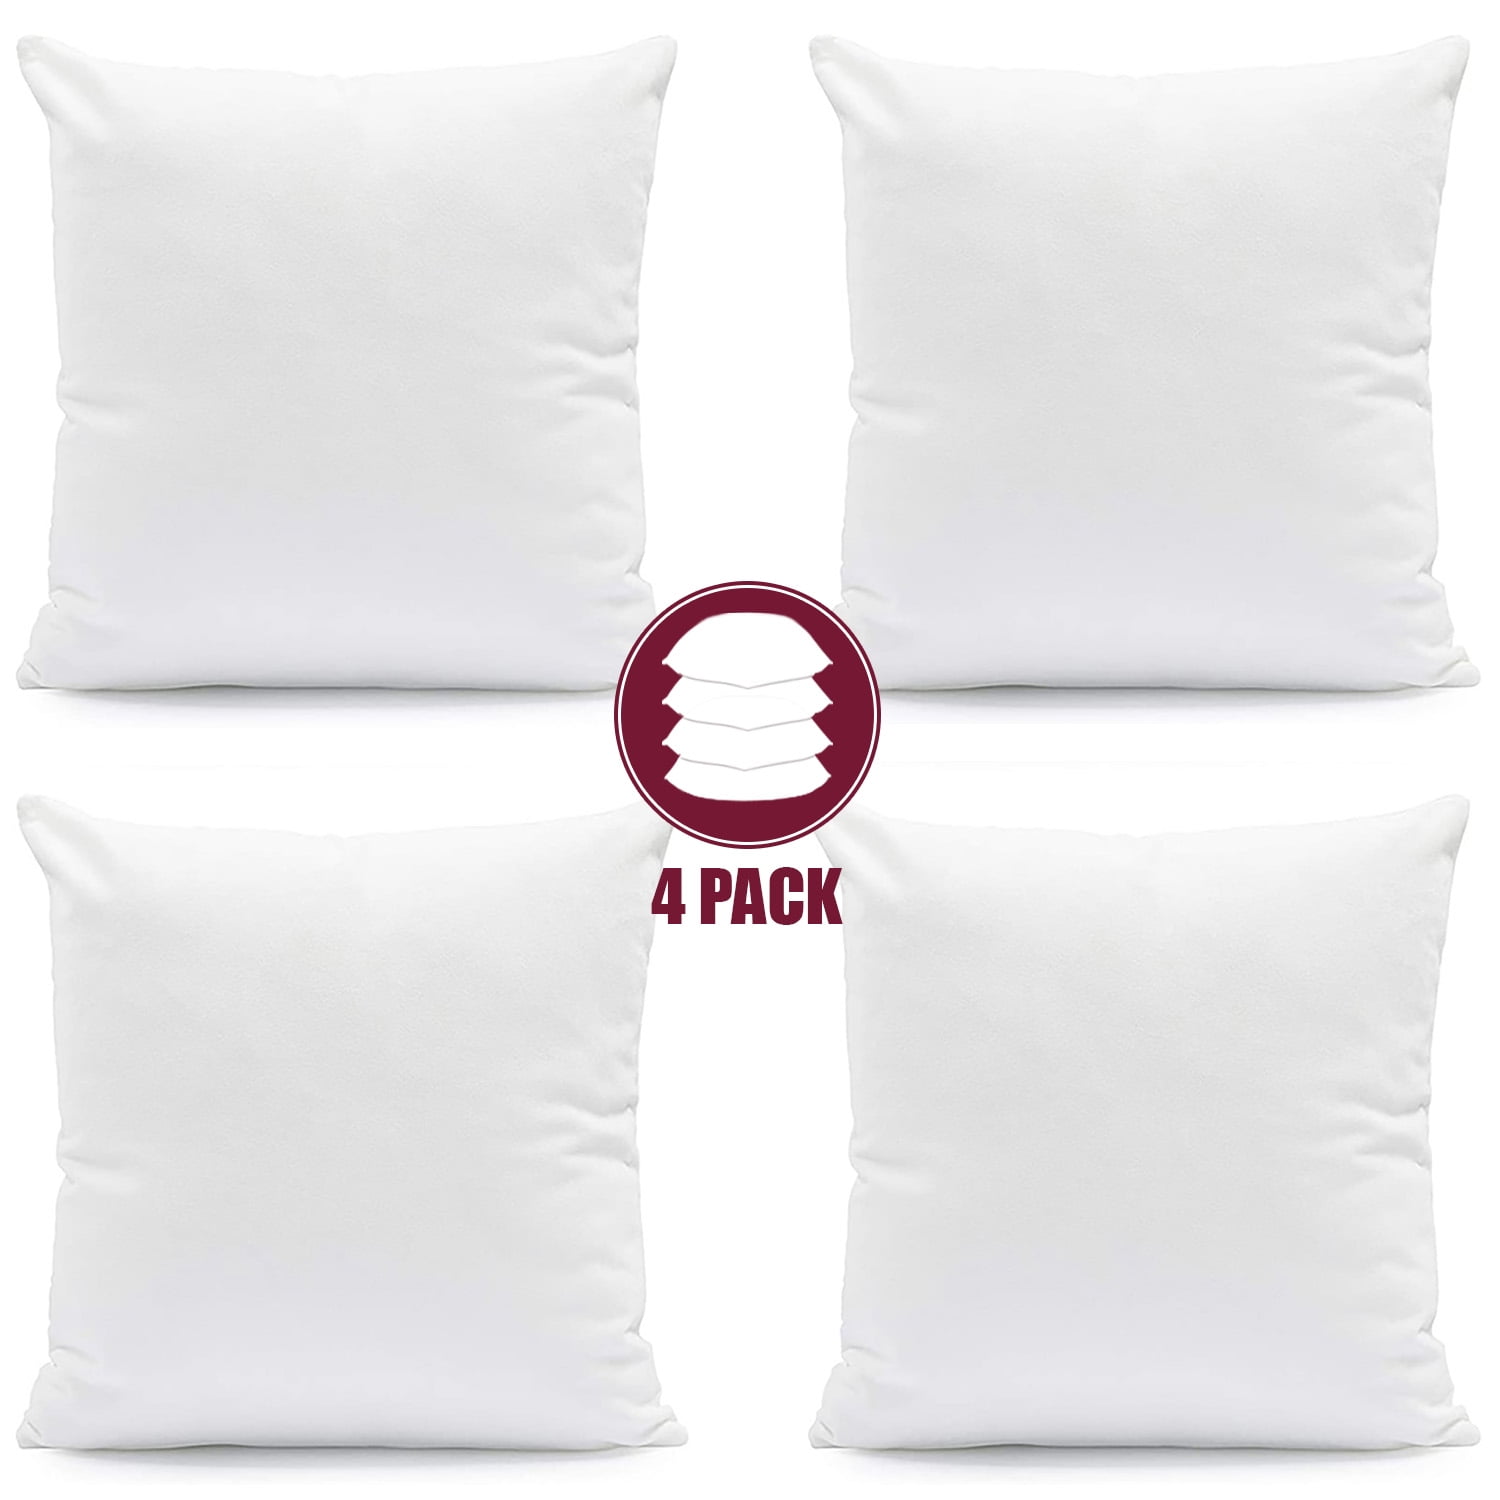 Keeble Outlets Throw Pillow Inserts - White, 18 x 18 Inches, Set of 2 Indoor Decorative Pillow - Square Pillow Inserts for Couch, Sofa, Bed and Chair